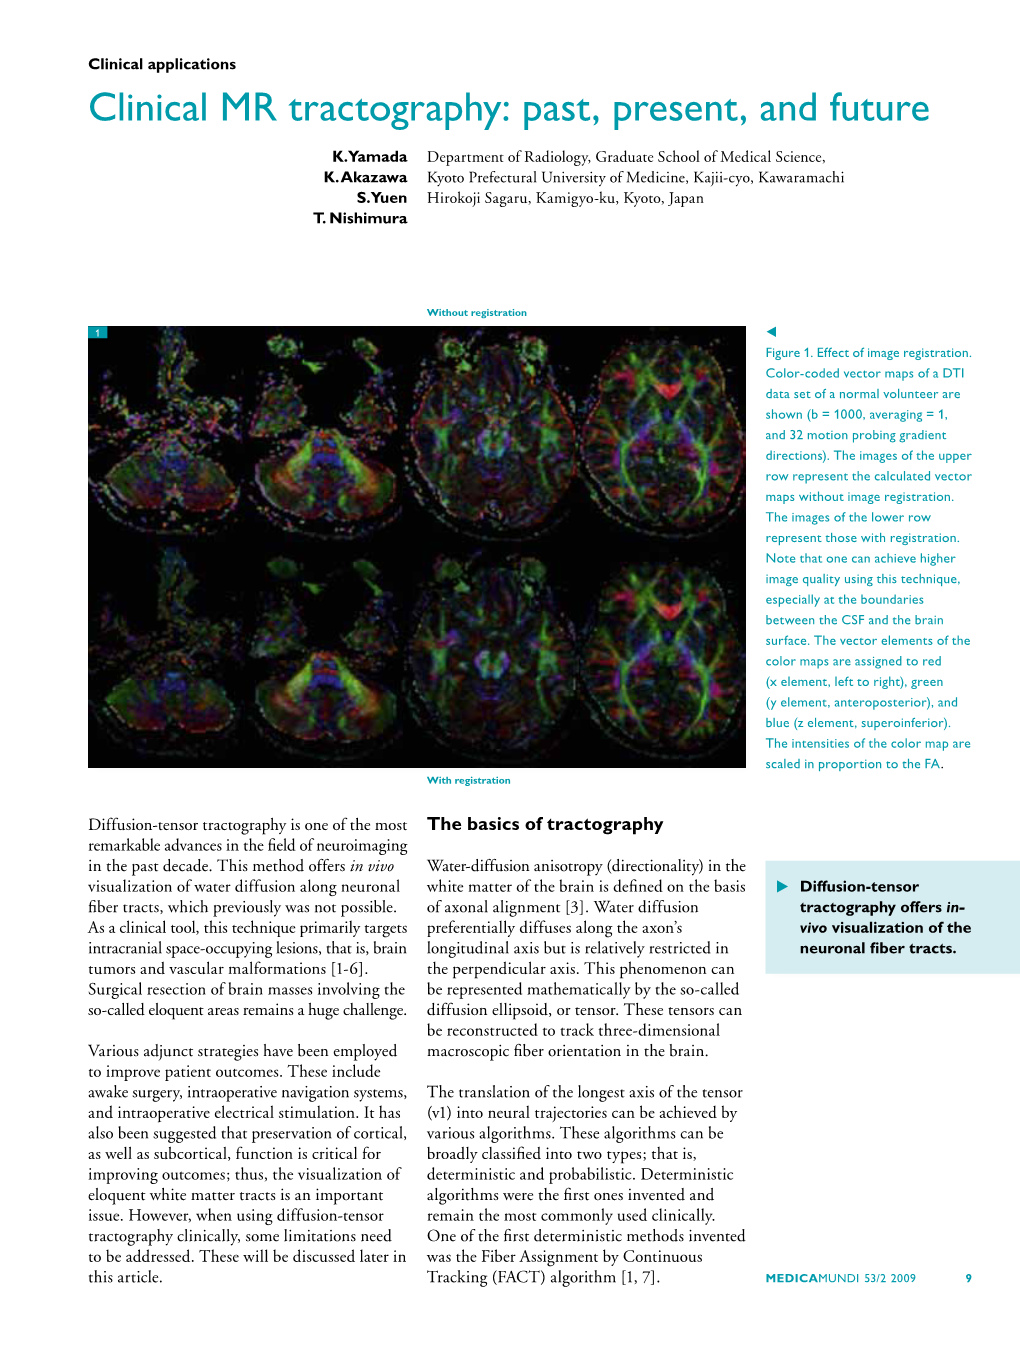 Clinical MR Tractography: Past, Present, and Future